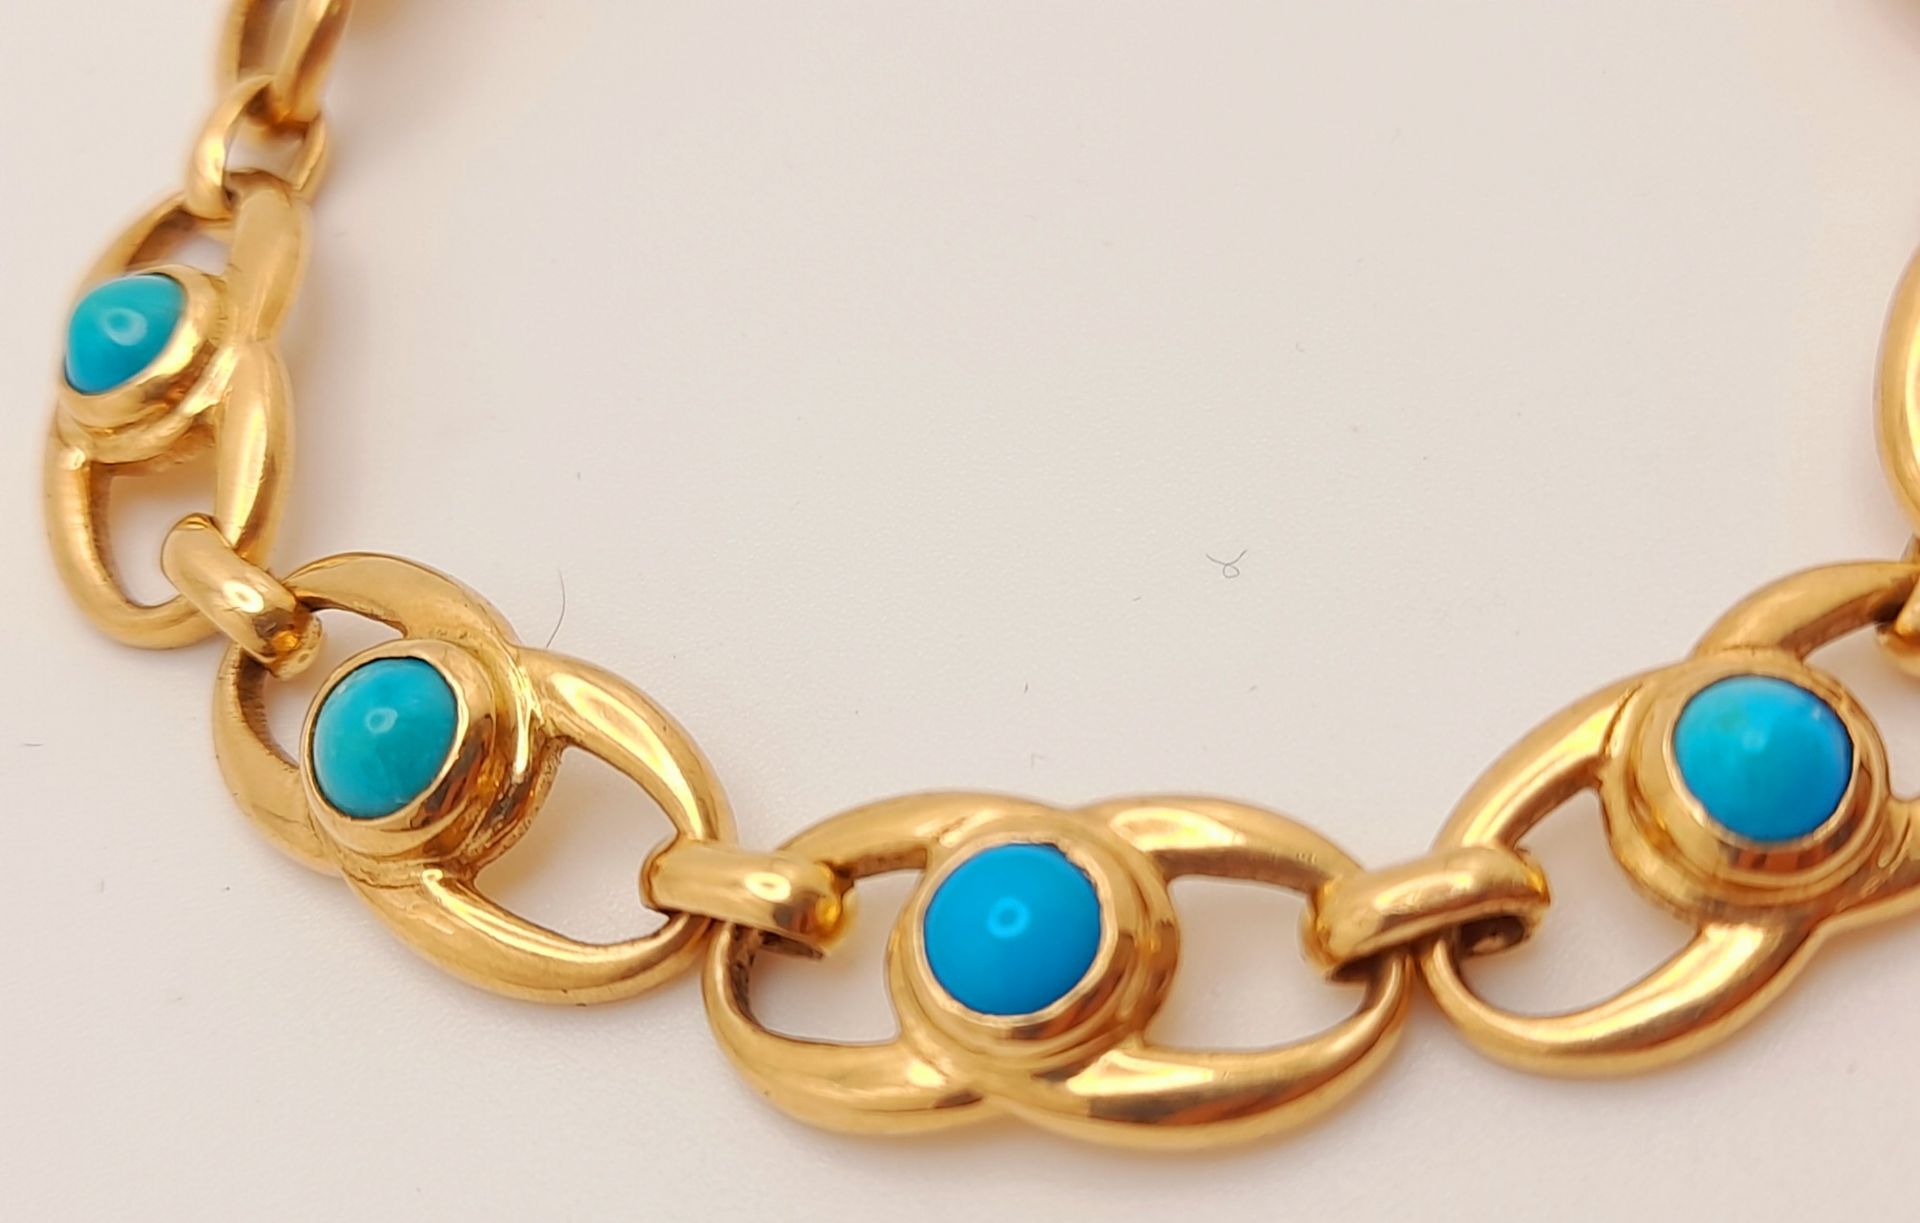 A 18K (TESTED AS) YELLOW GOLD BRACELET SET WITH 9 TURQUOISE STONES, 18CM LENGTH, 15.7G. ref: BM01 - Image 2 of 6